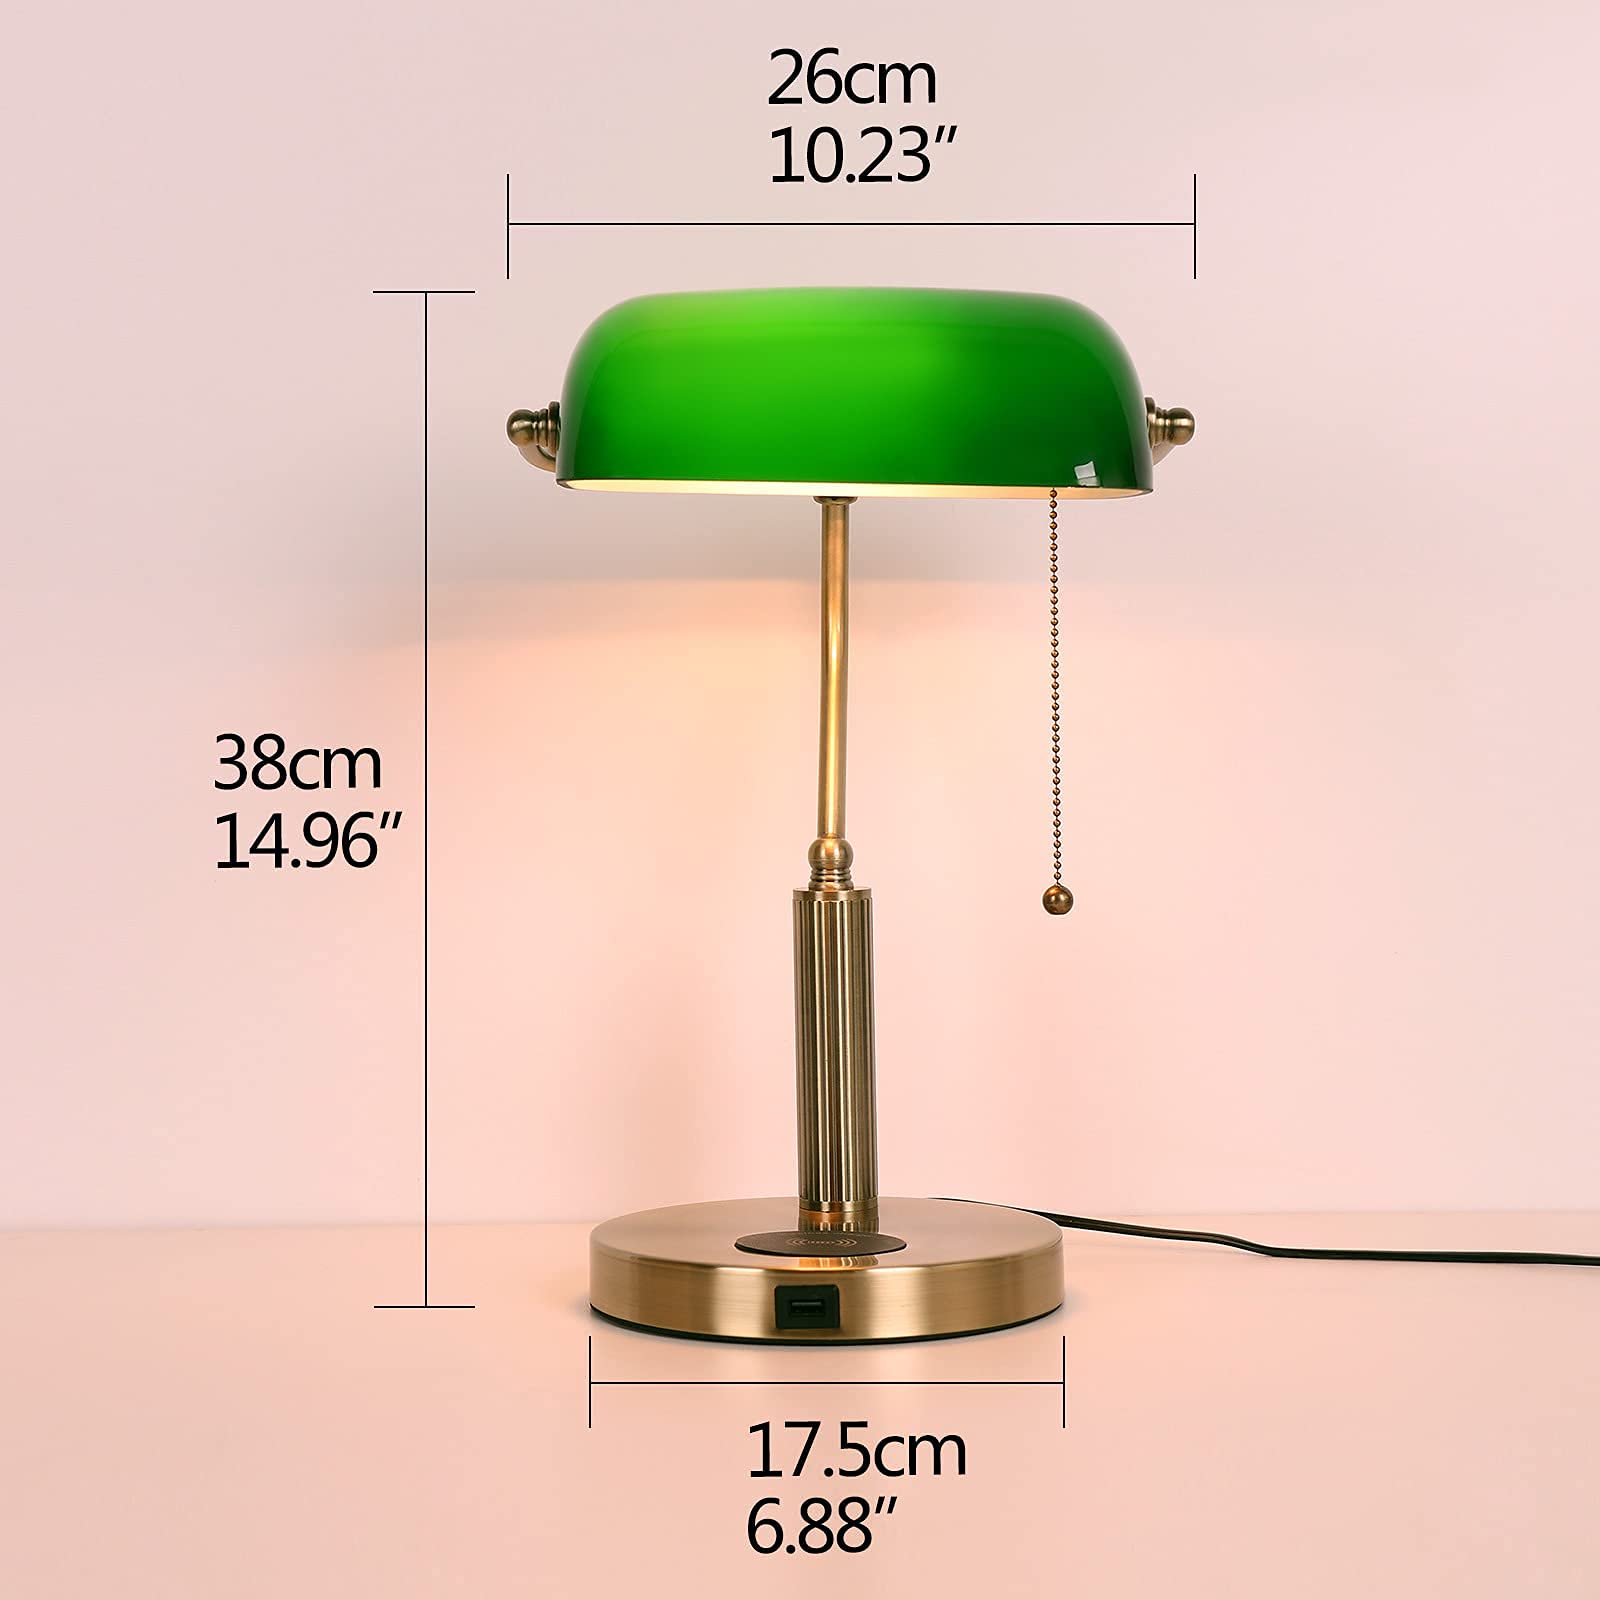 FIRVRE Glass Bankers Desk Lamp USB Wireless Charging Port LED Desk Lamp Classic Retro Pull Chain Switch Table lamp Reading Modern for Home Office nightstand Bedside Study Desk Library (Green)